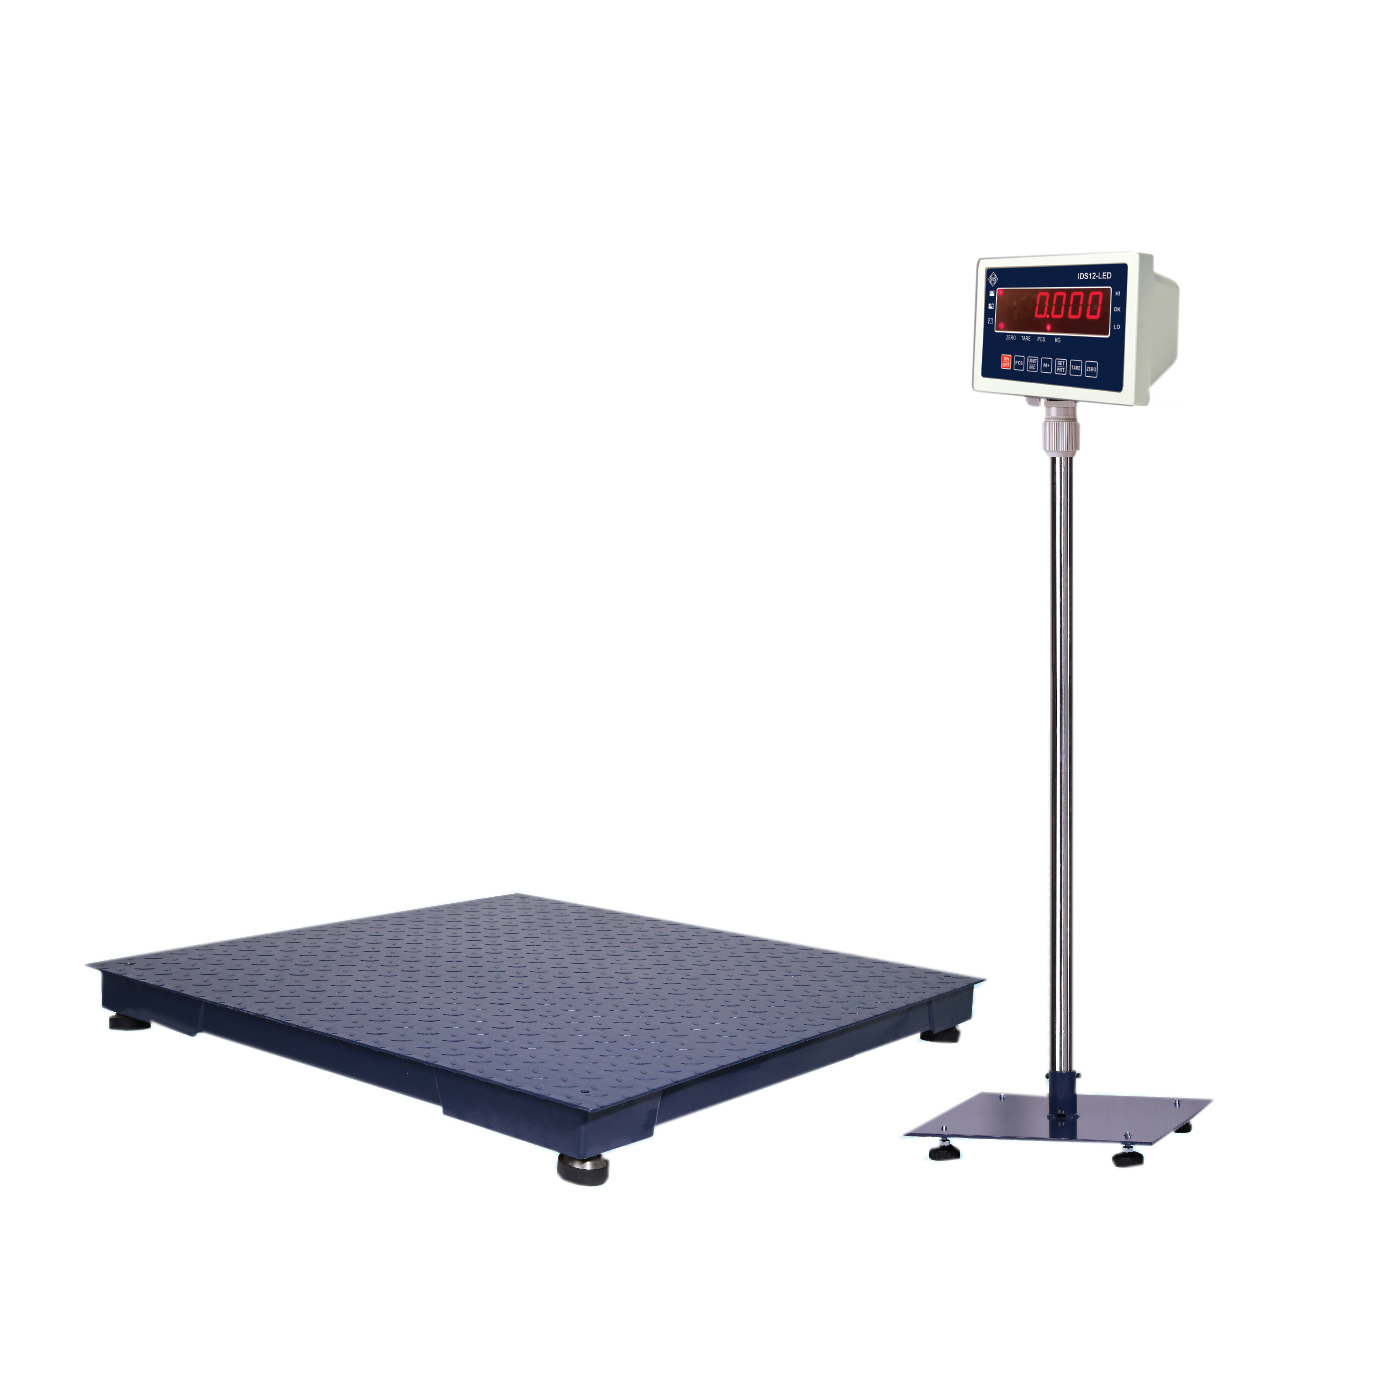 IDS12-LED-ABS + FLOOR SCALE